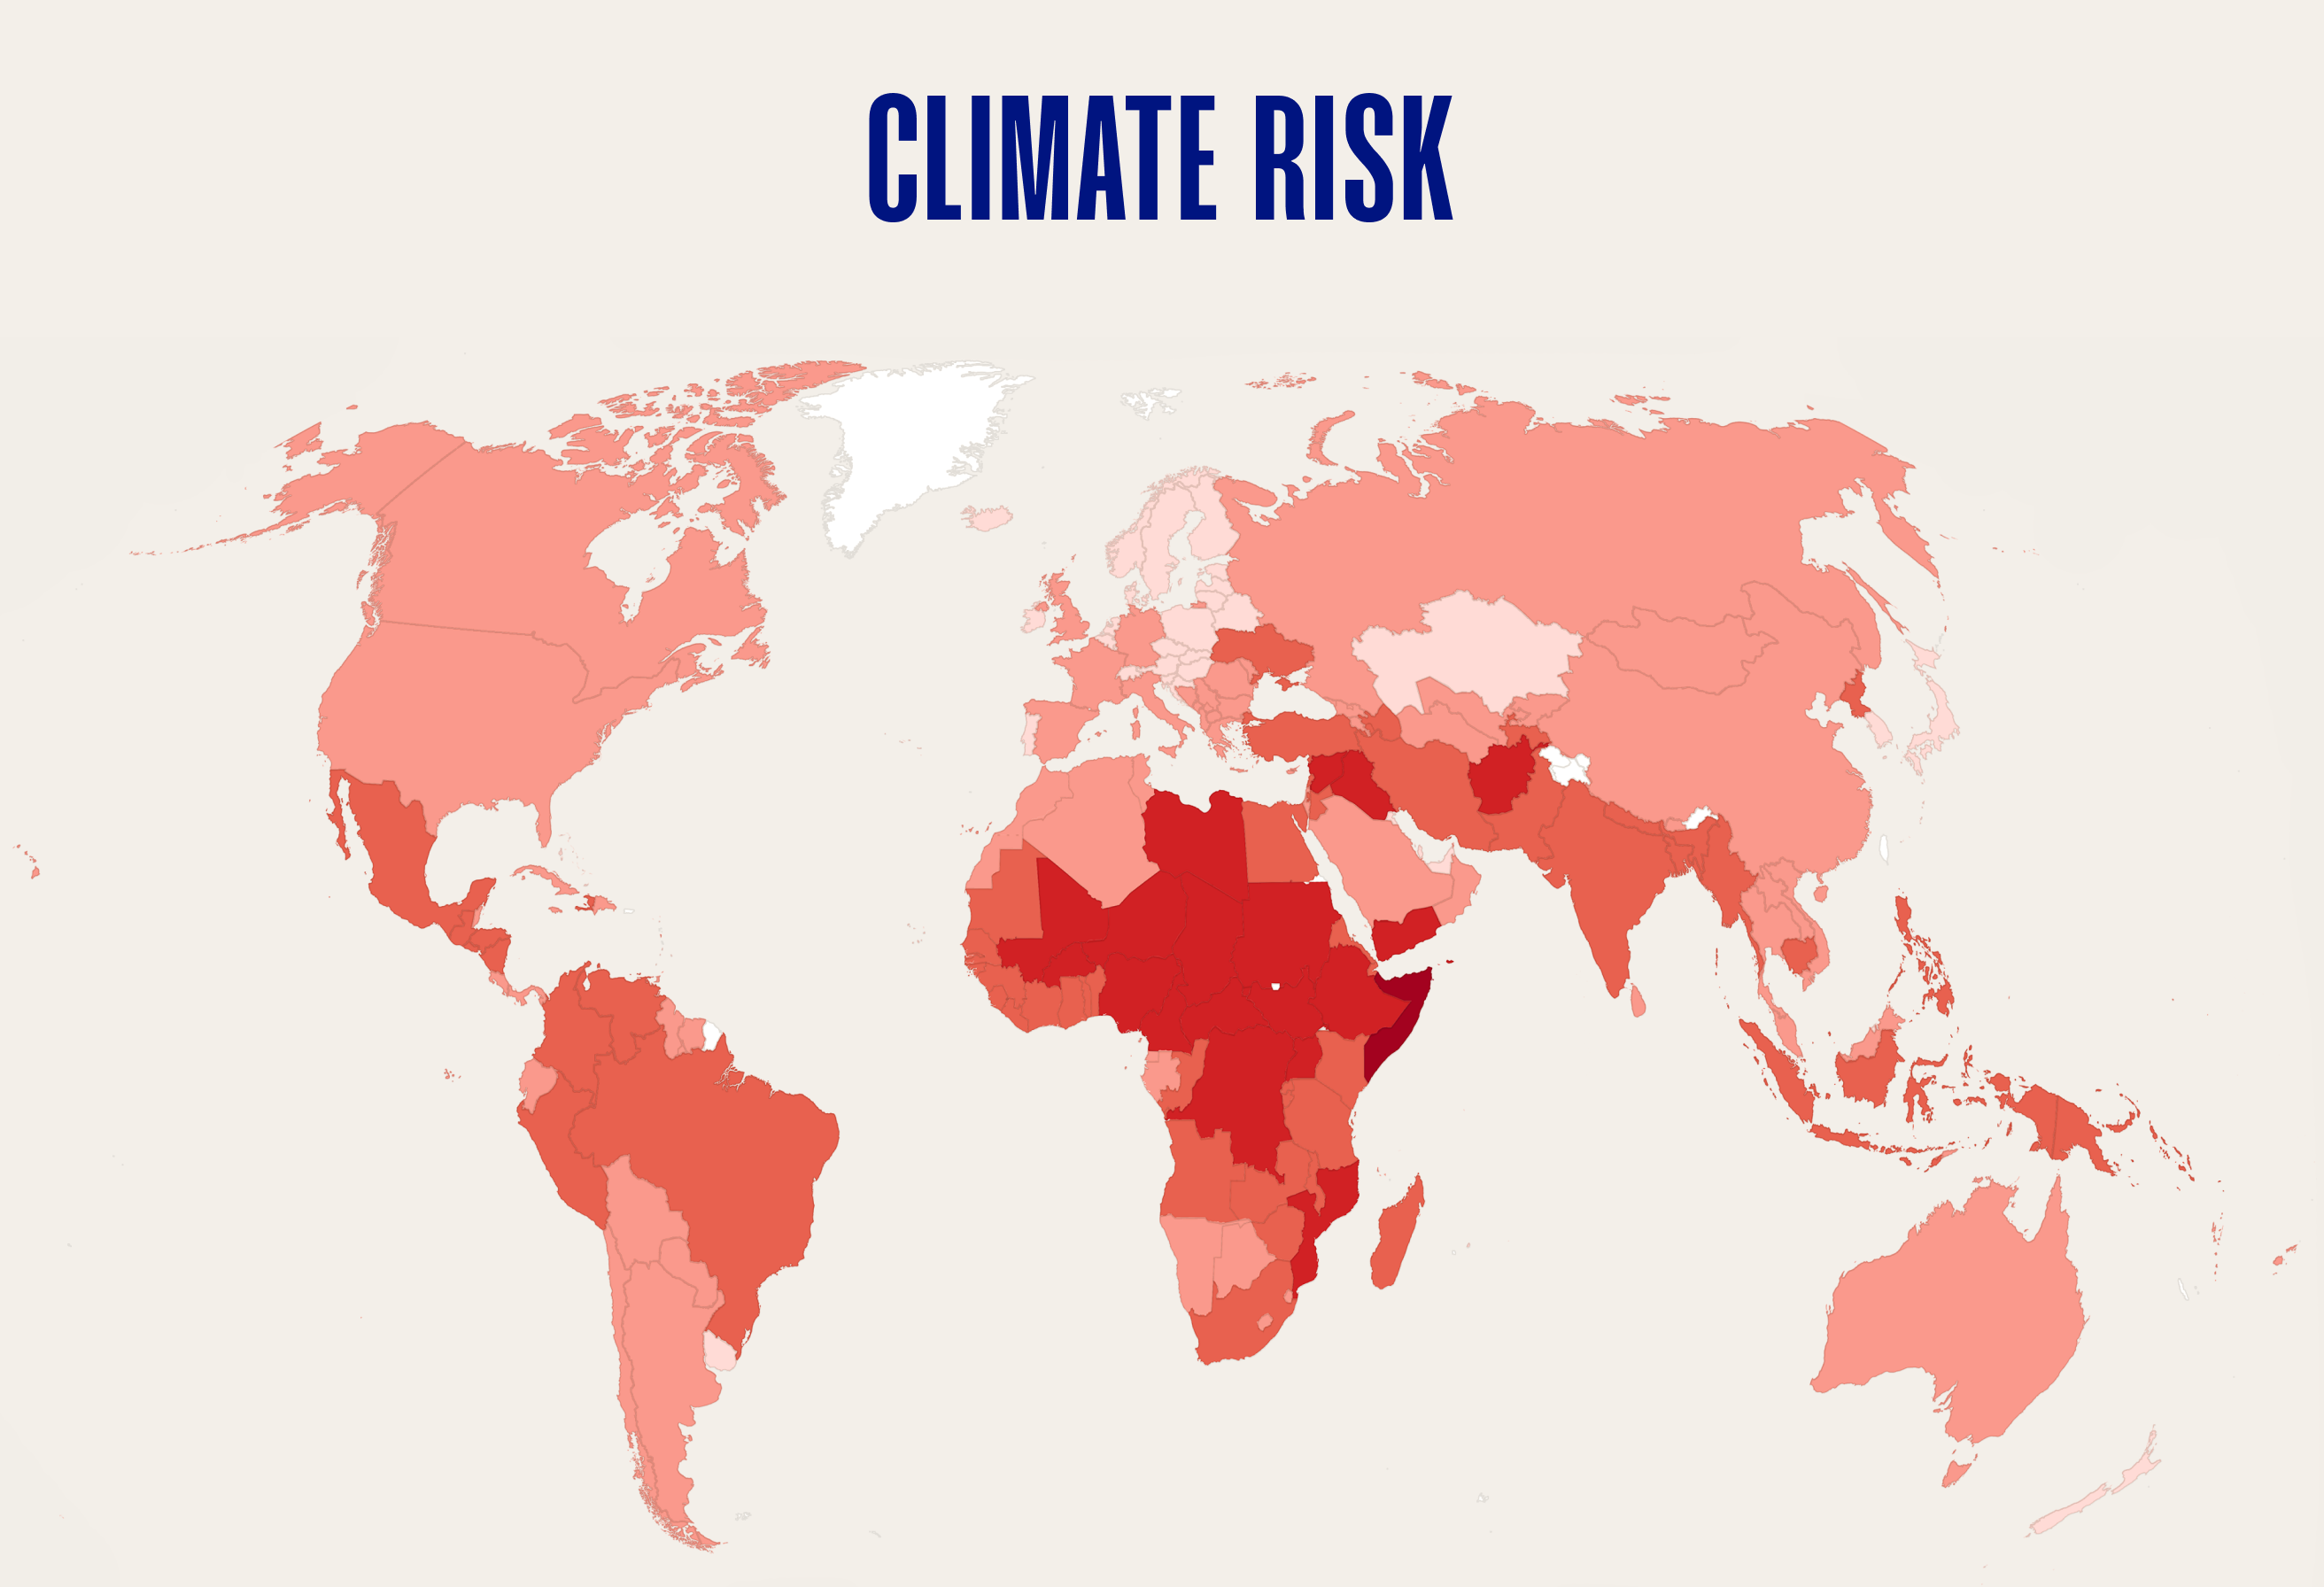 African countries are amongst the most vulnerable against climate change.